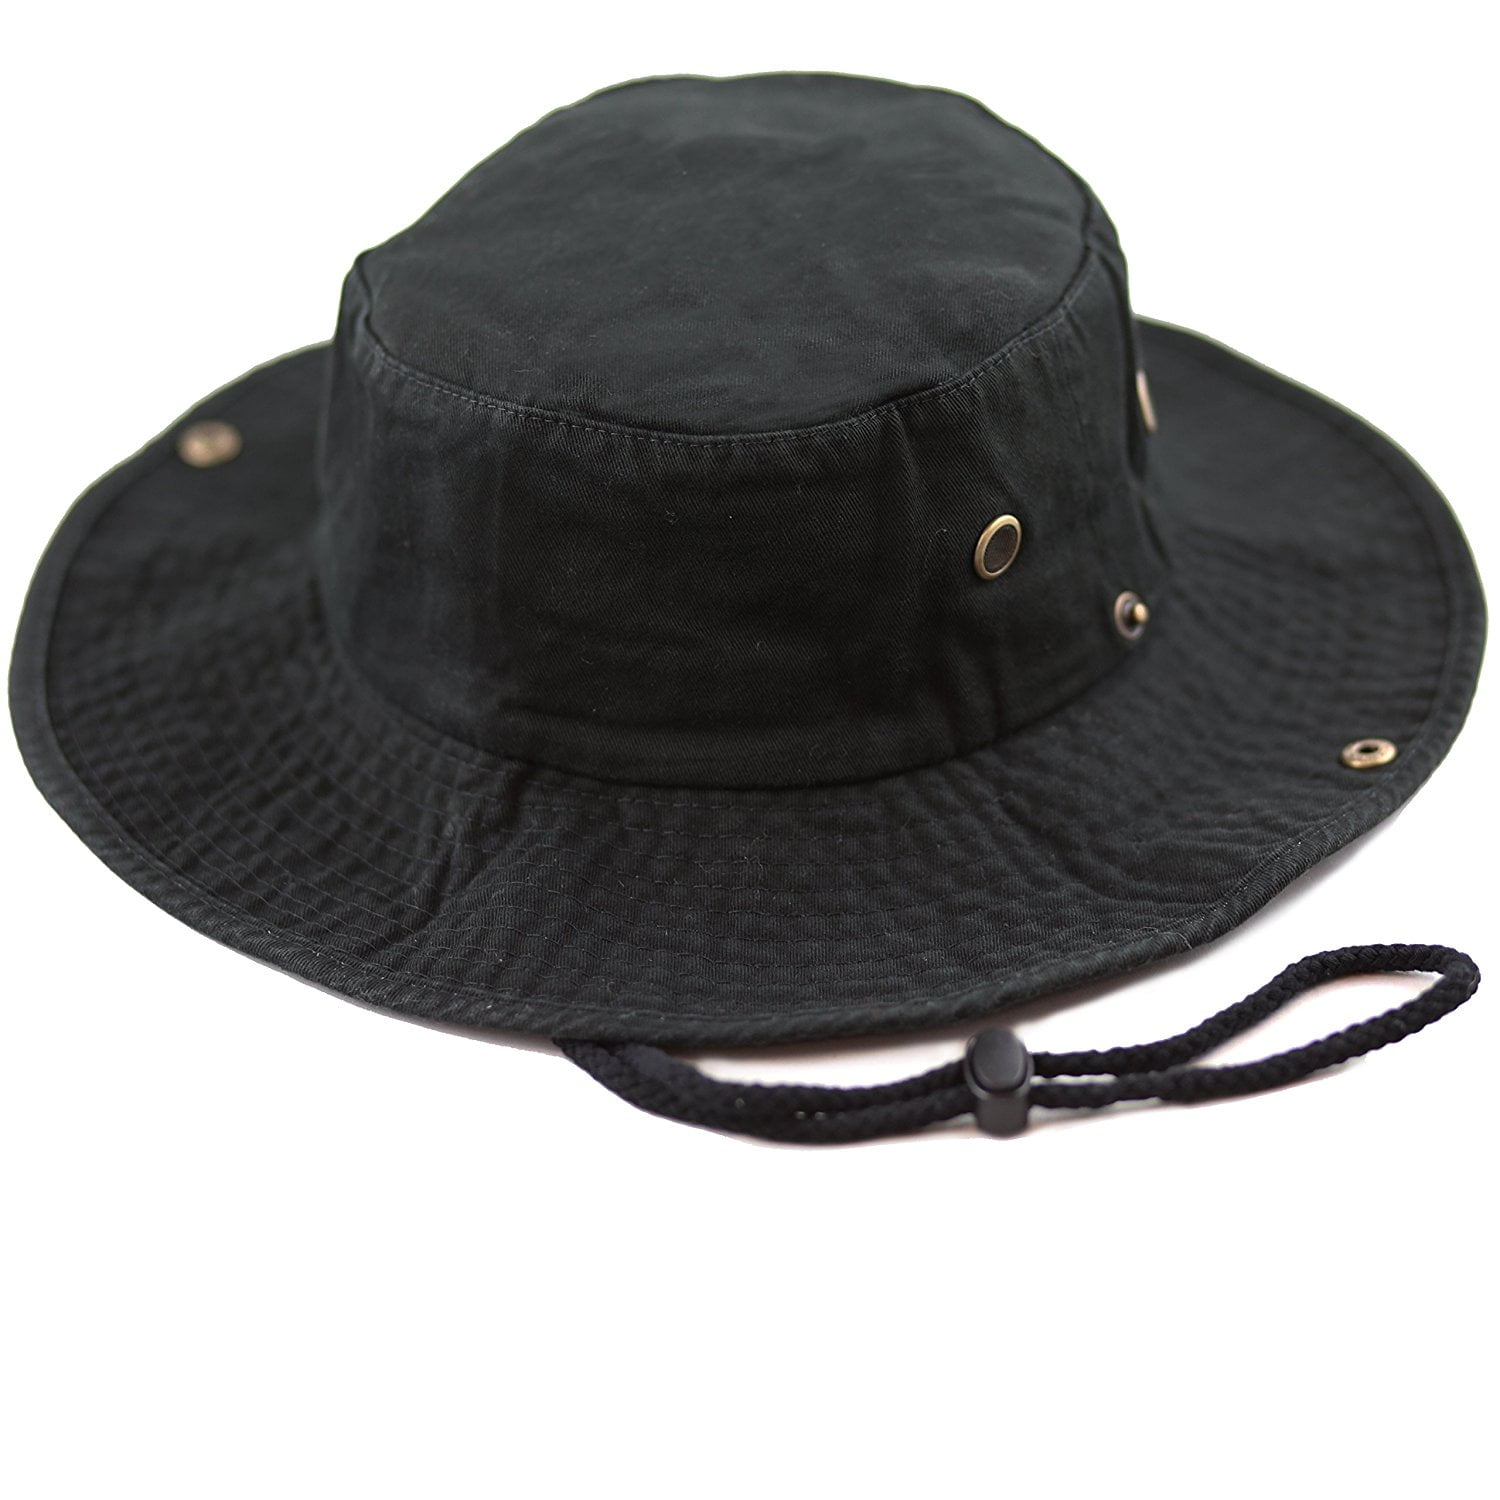 The Hat Depot Cotton Stone-Washed Safari Wide Brim Foldable Double-Sided Sun Boonie Bucket Hat